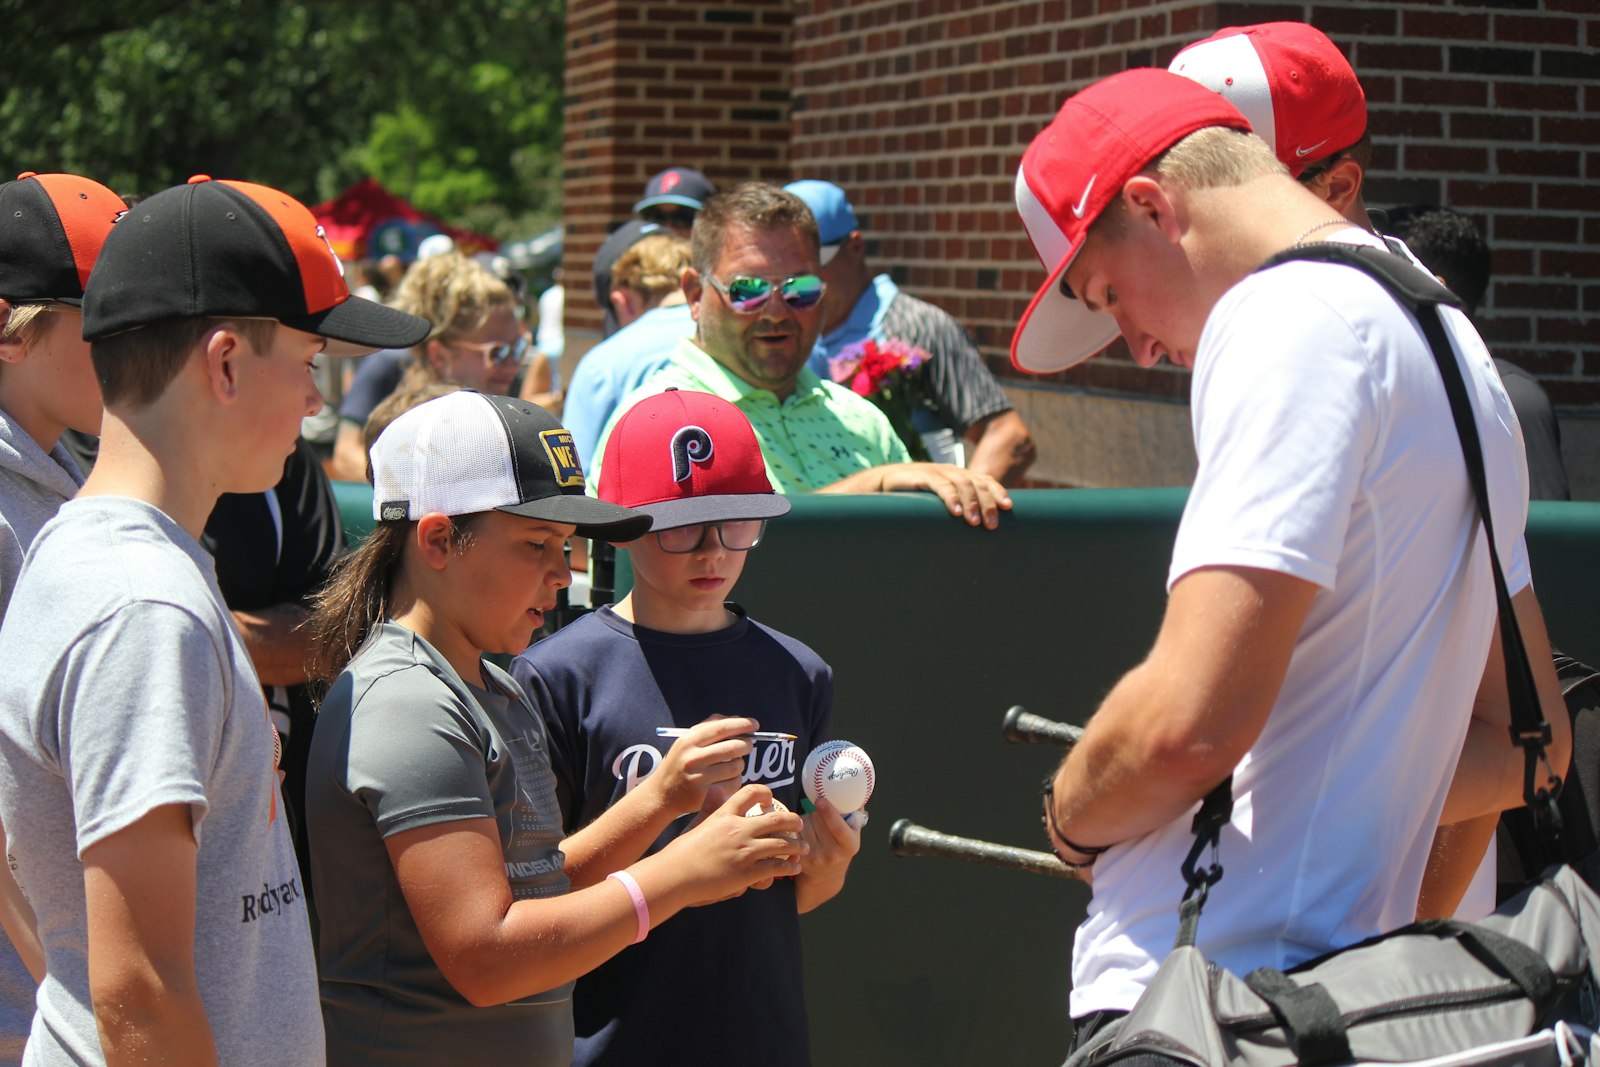 These young autograph seekers know a good prospect when they see one. They jumped at the chance to grab Brock Porter’s autograph after he twirled a no-hitter in the state semi-final game at Michigan State University.